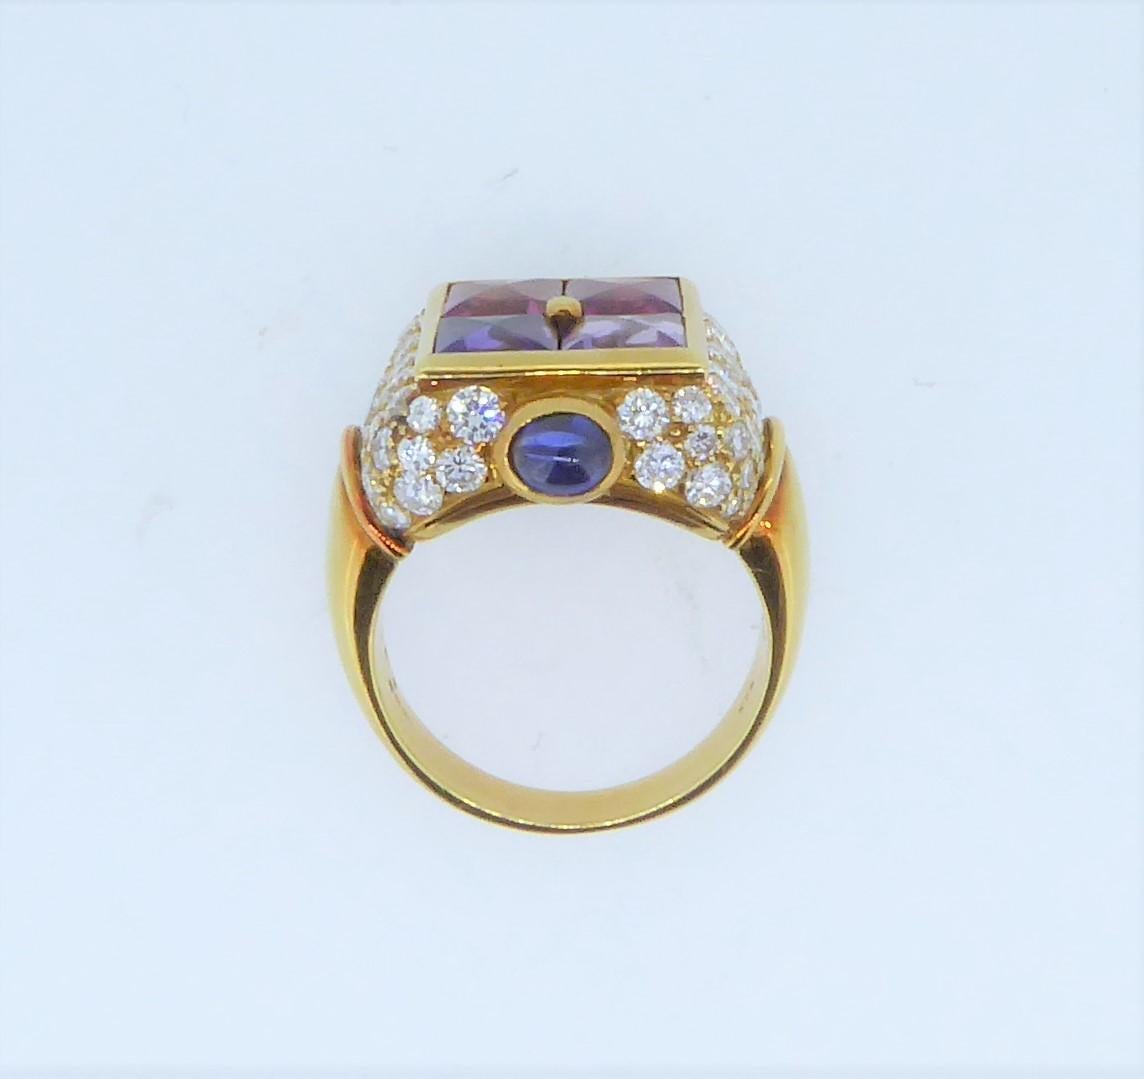 A Bulgari 18 Carat Yellow Gold Multi-Gem And Diamond Carré Ring. 
The ring adorned with amethyst, topaz, tourmaline and cabochon sapphires within a pavé-set diamond border. Signed 'Bulgari' '750' and numbered. Weighs approximately 12.2 grams. Finger